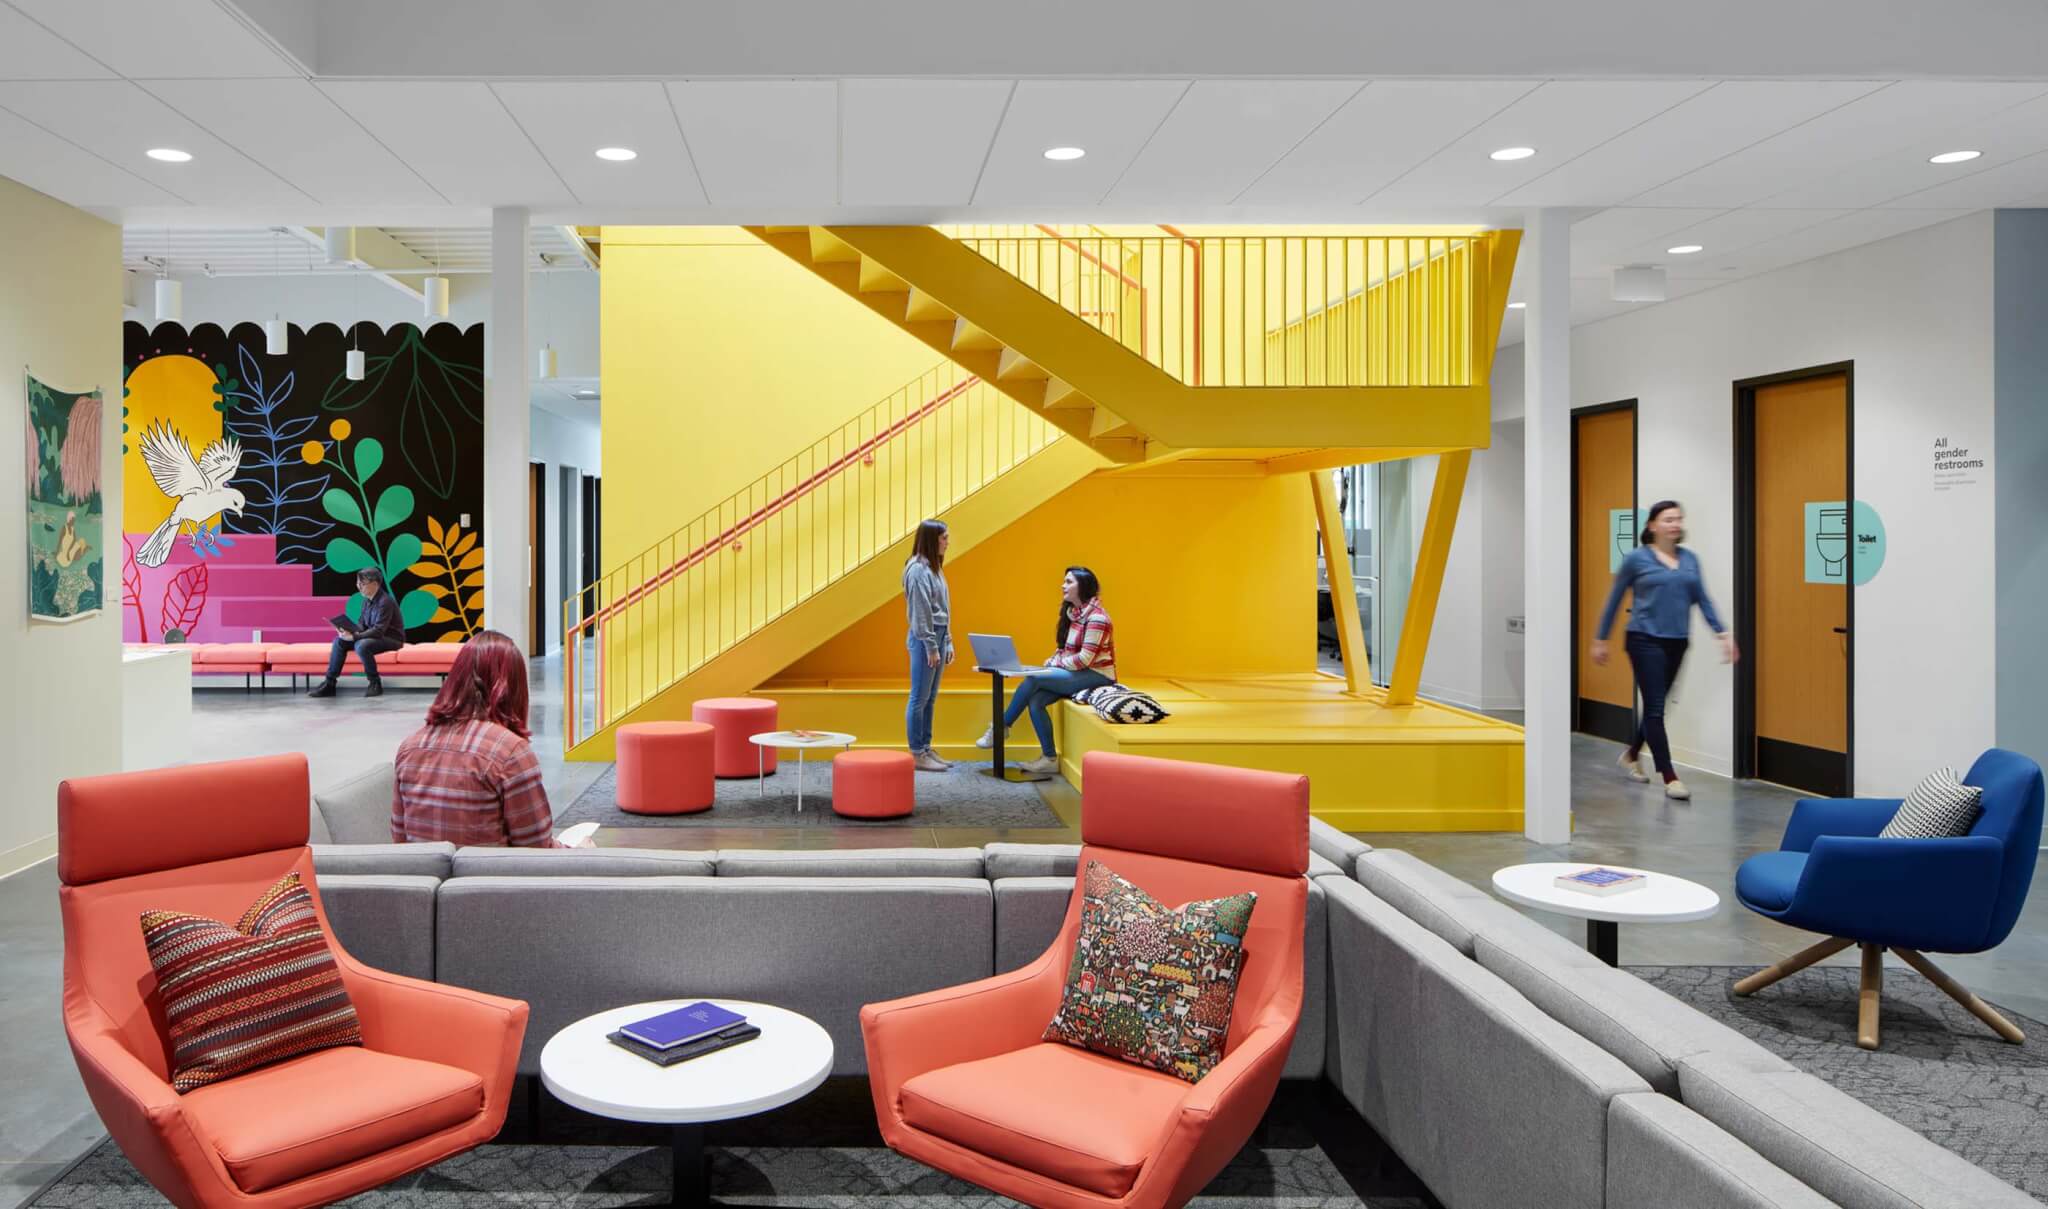 lounge space with orange chairs and bright yellow staircase in the background